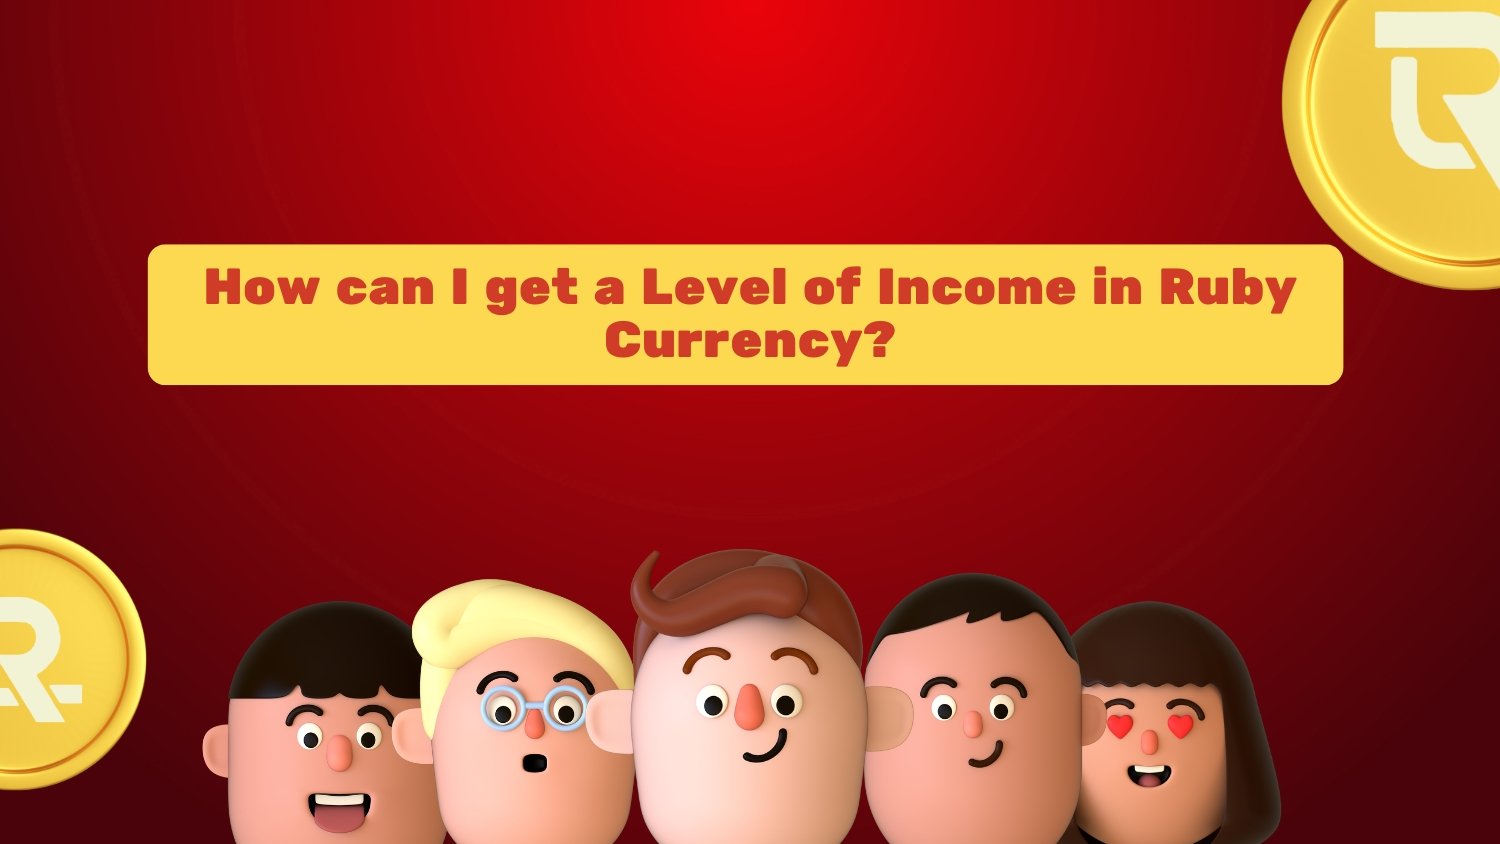 RBC-How can I get a Level of Income in Ruby Currency